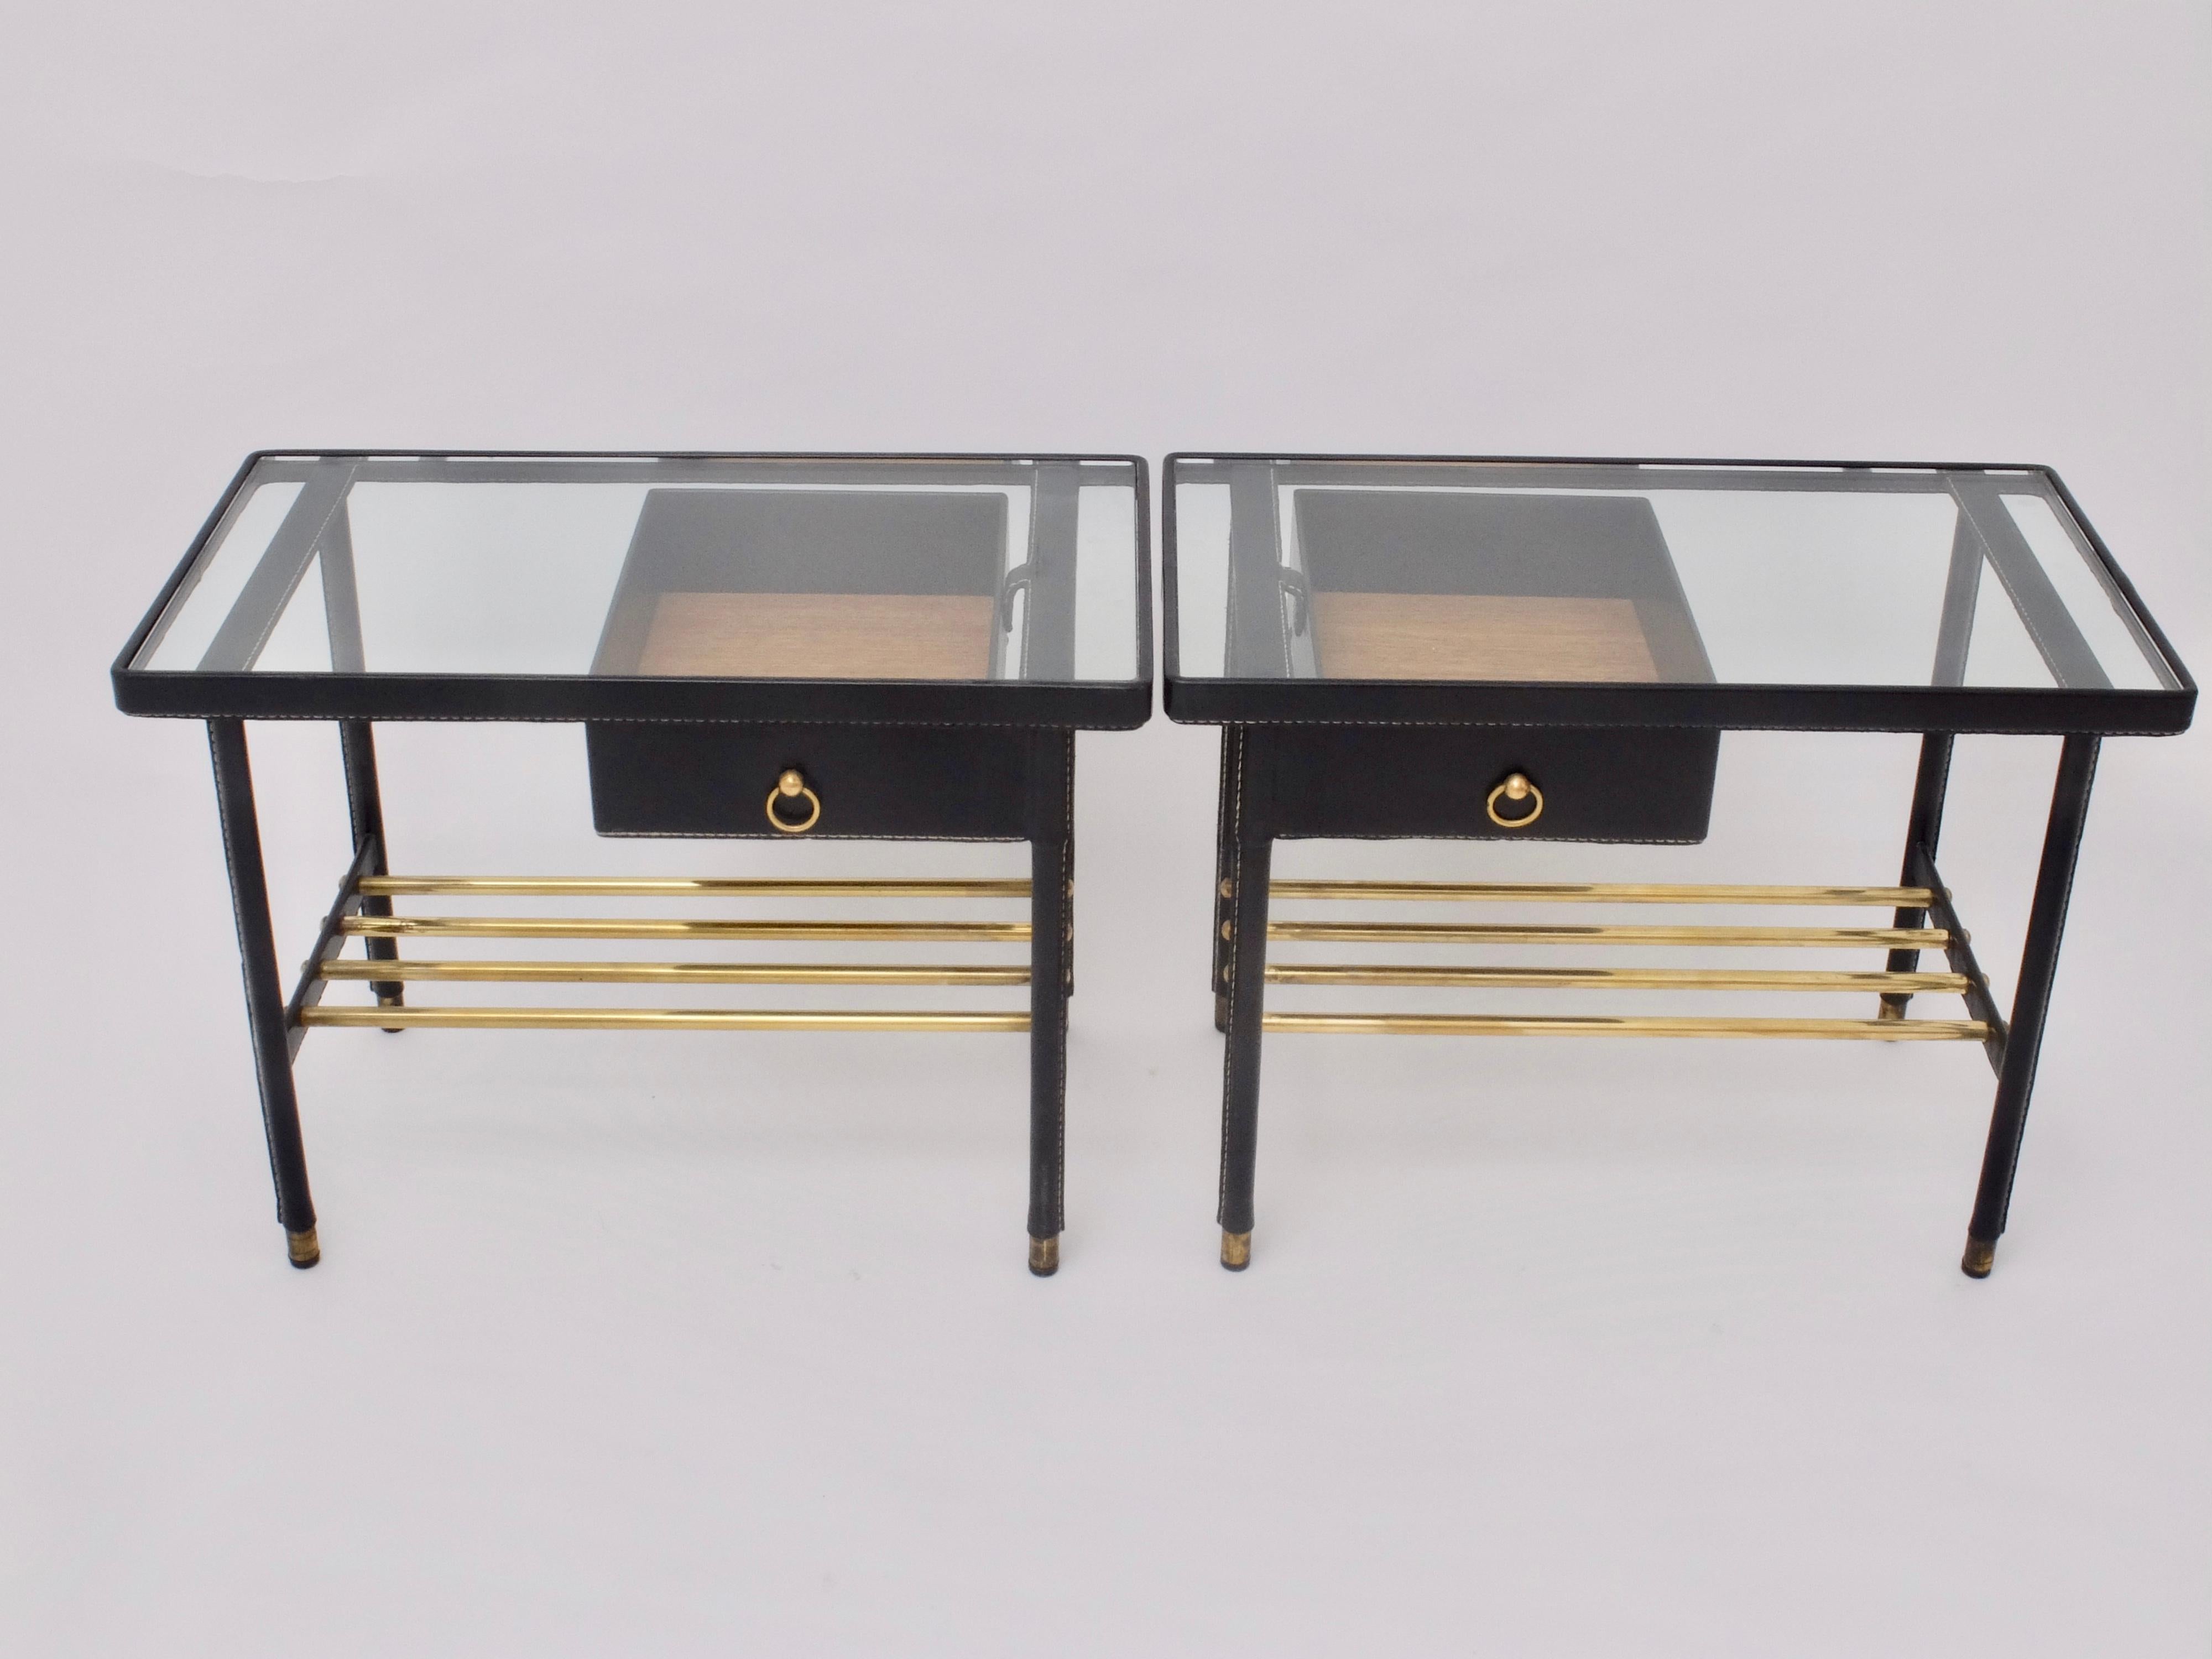 Jacques Adnet Bed Side Table in Piqué Sellier Leather Hermes Nightstands 1